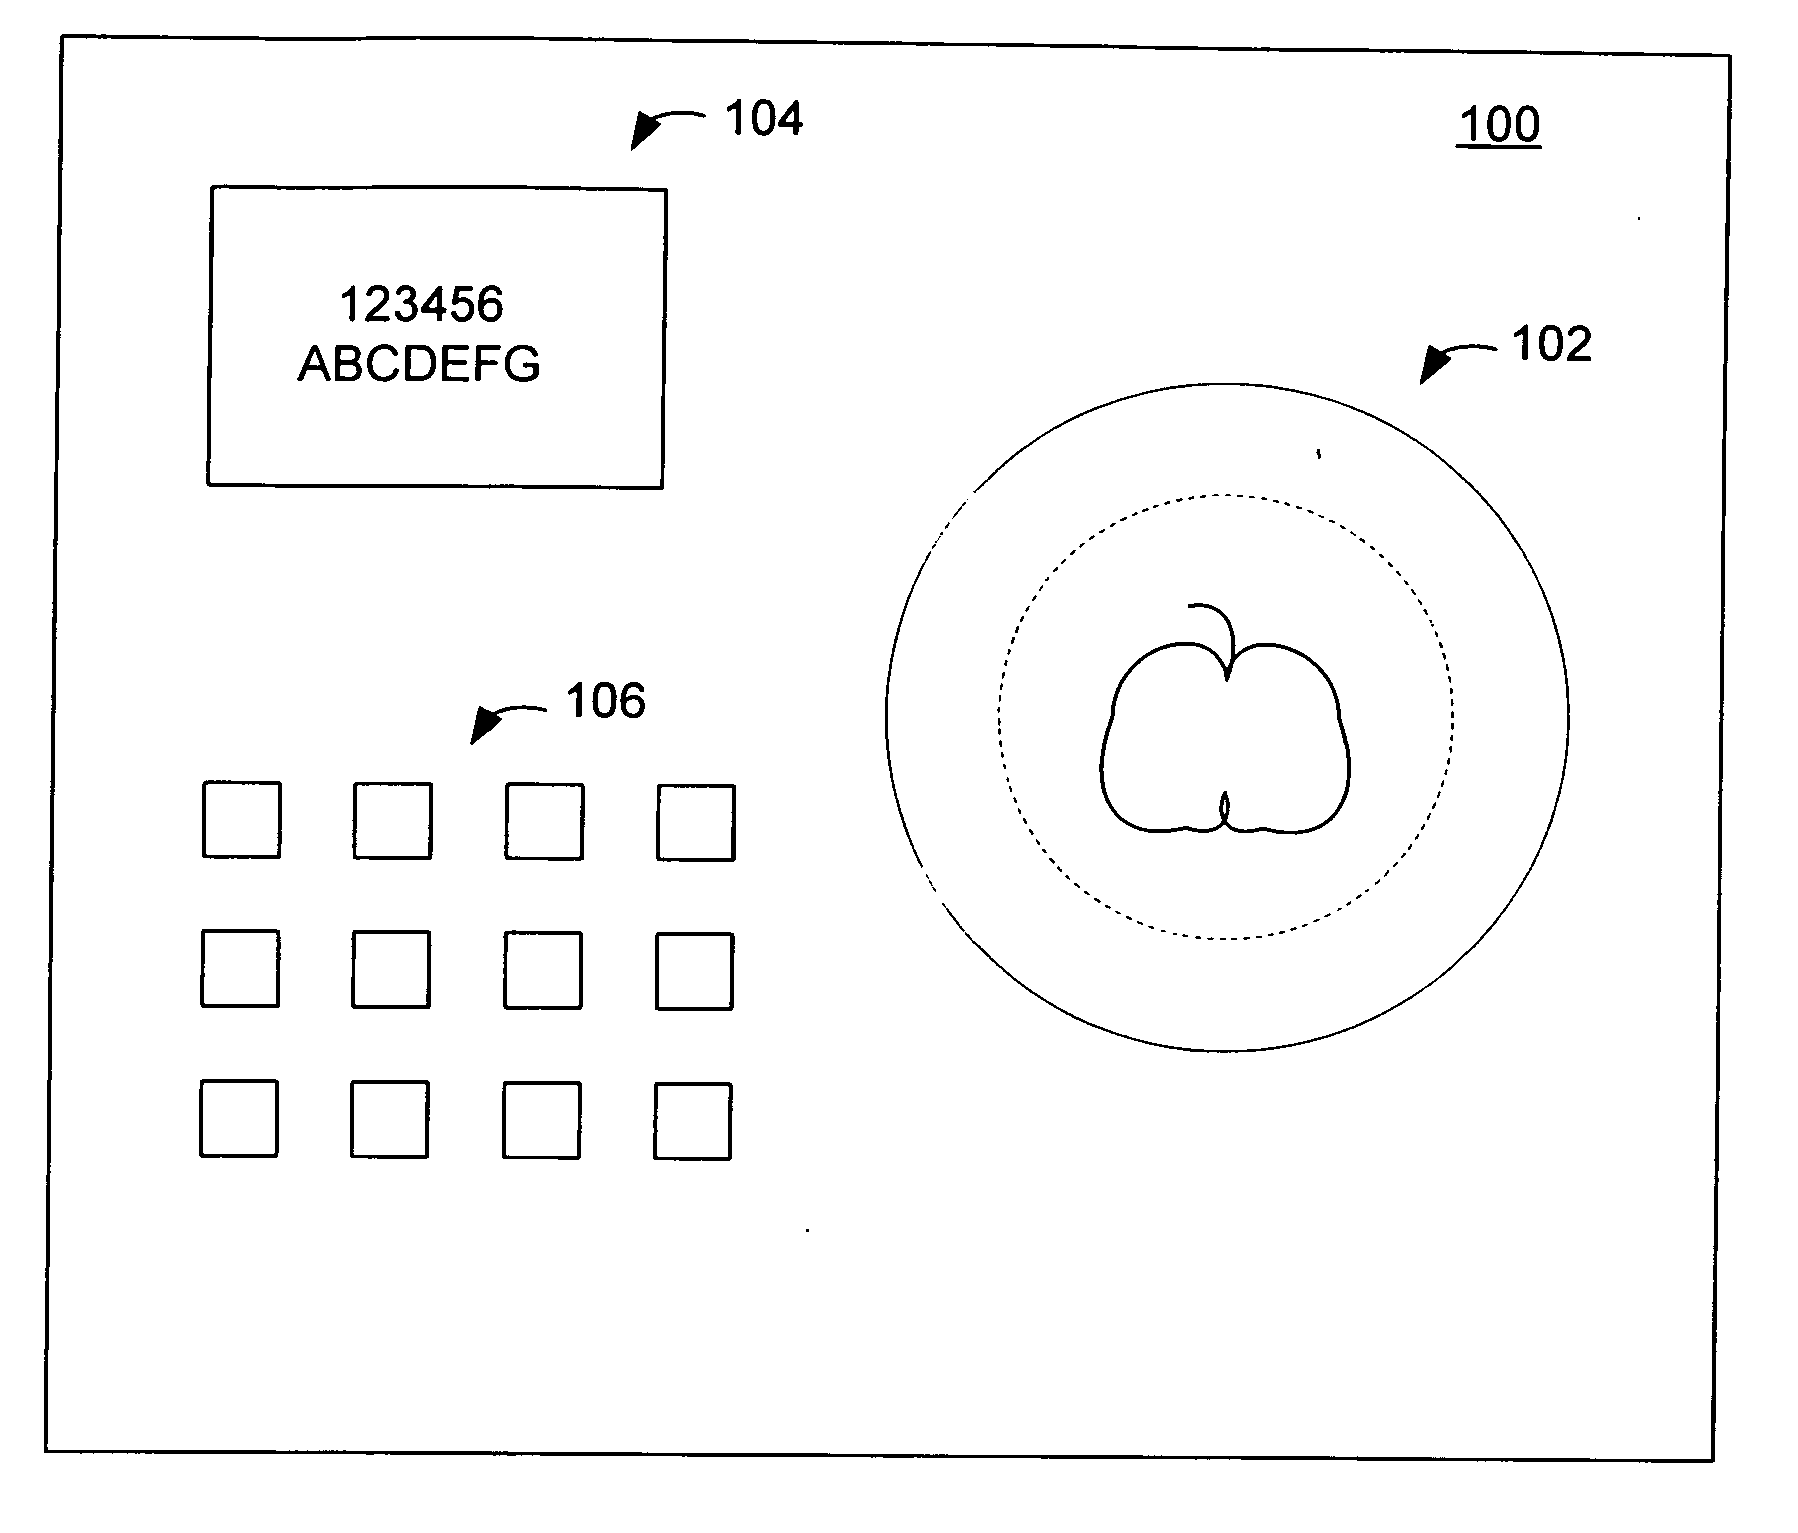 Placemat for calculating and monitoring calorie intake